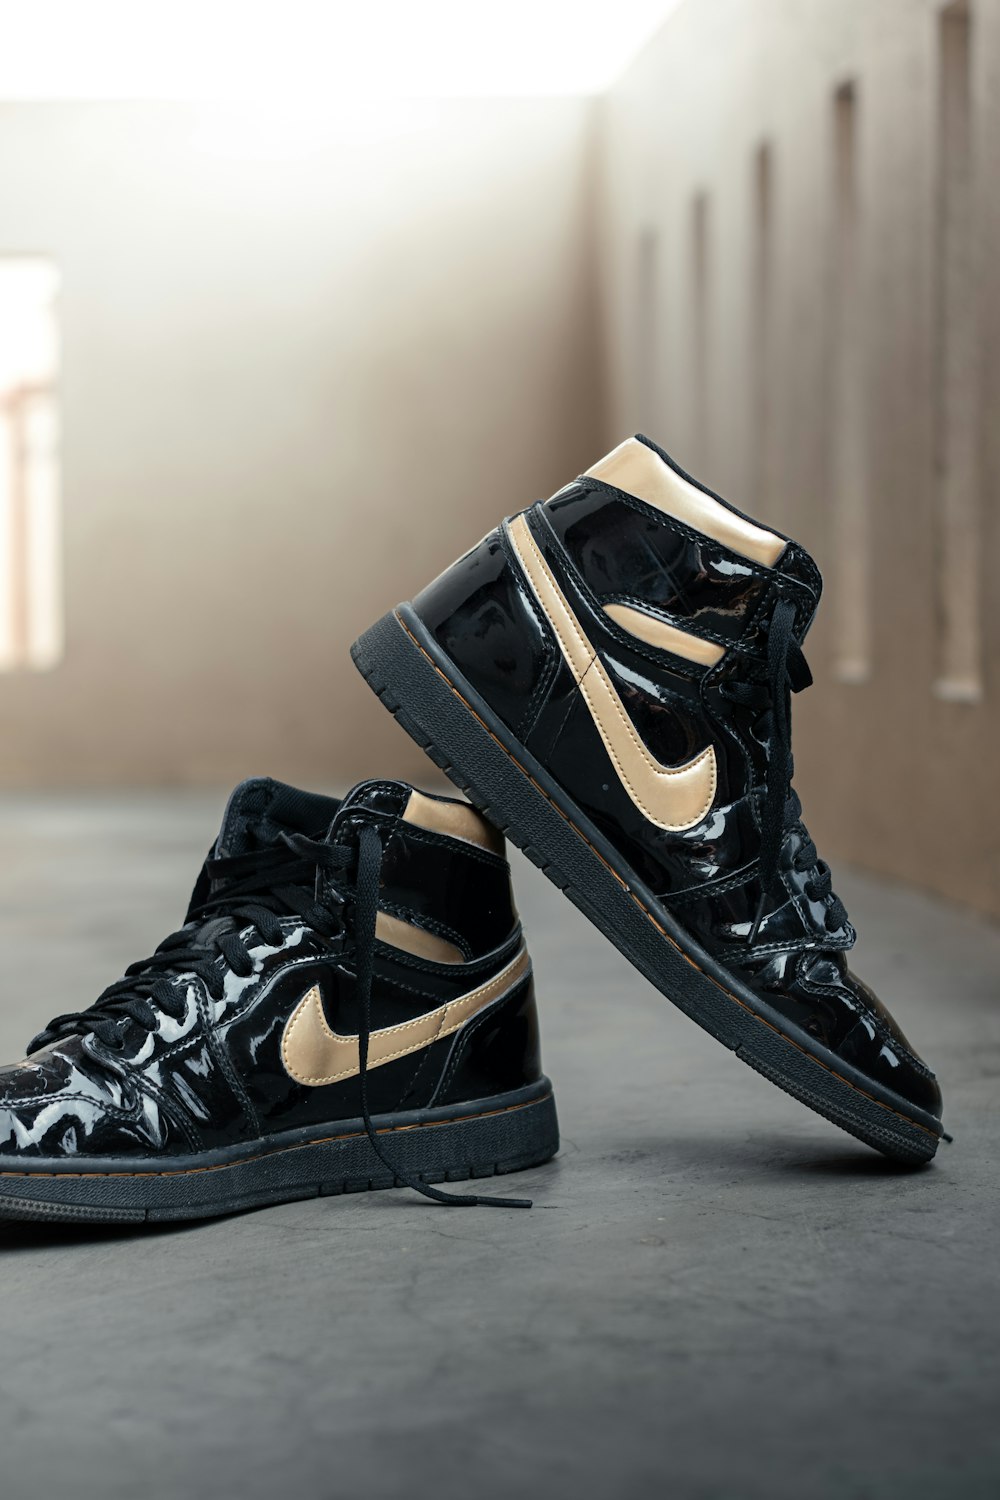 a pair of black and gold nike sneakers